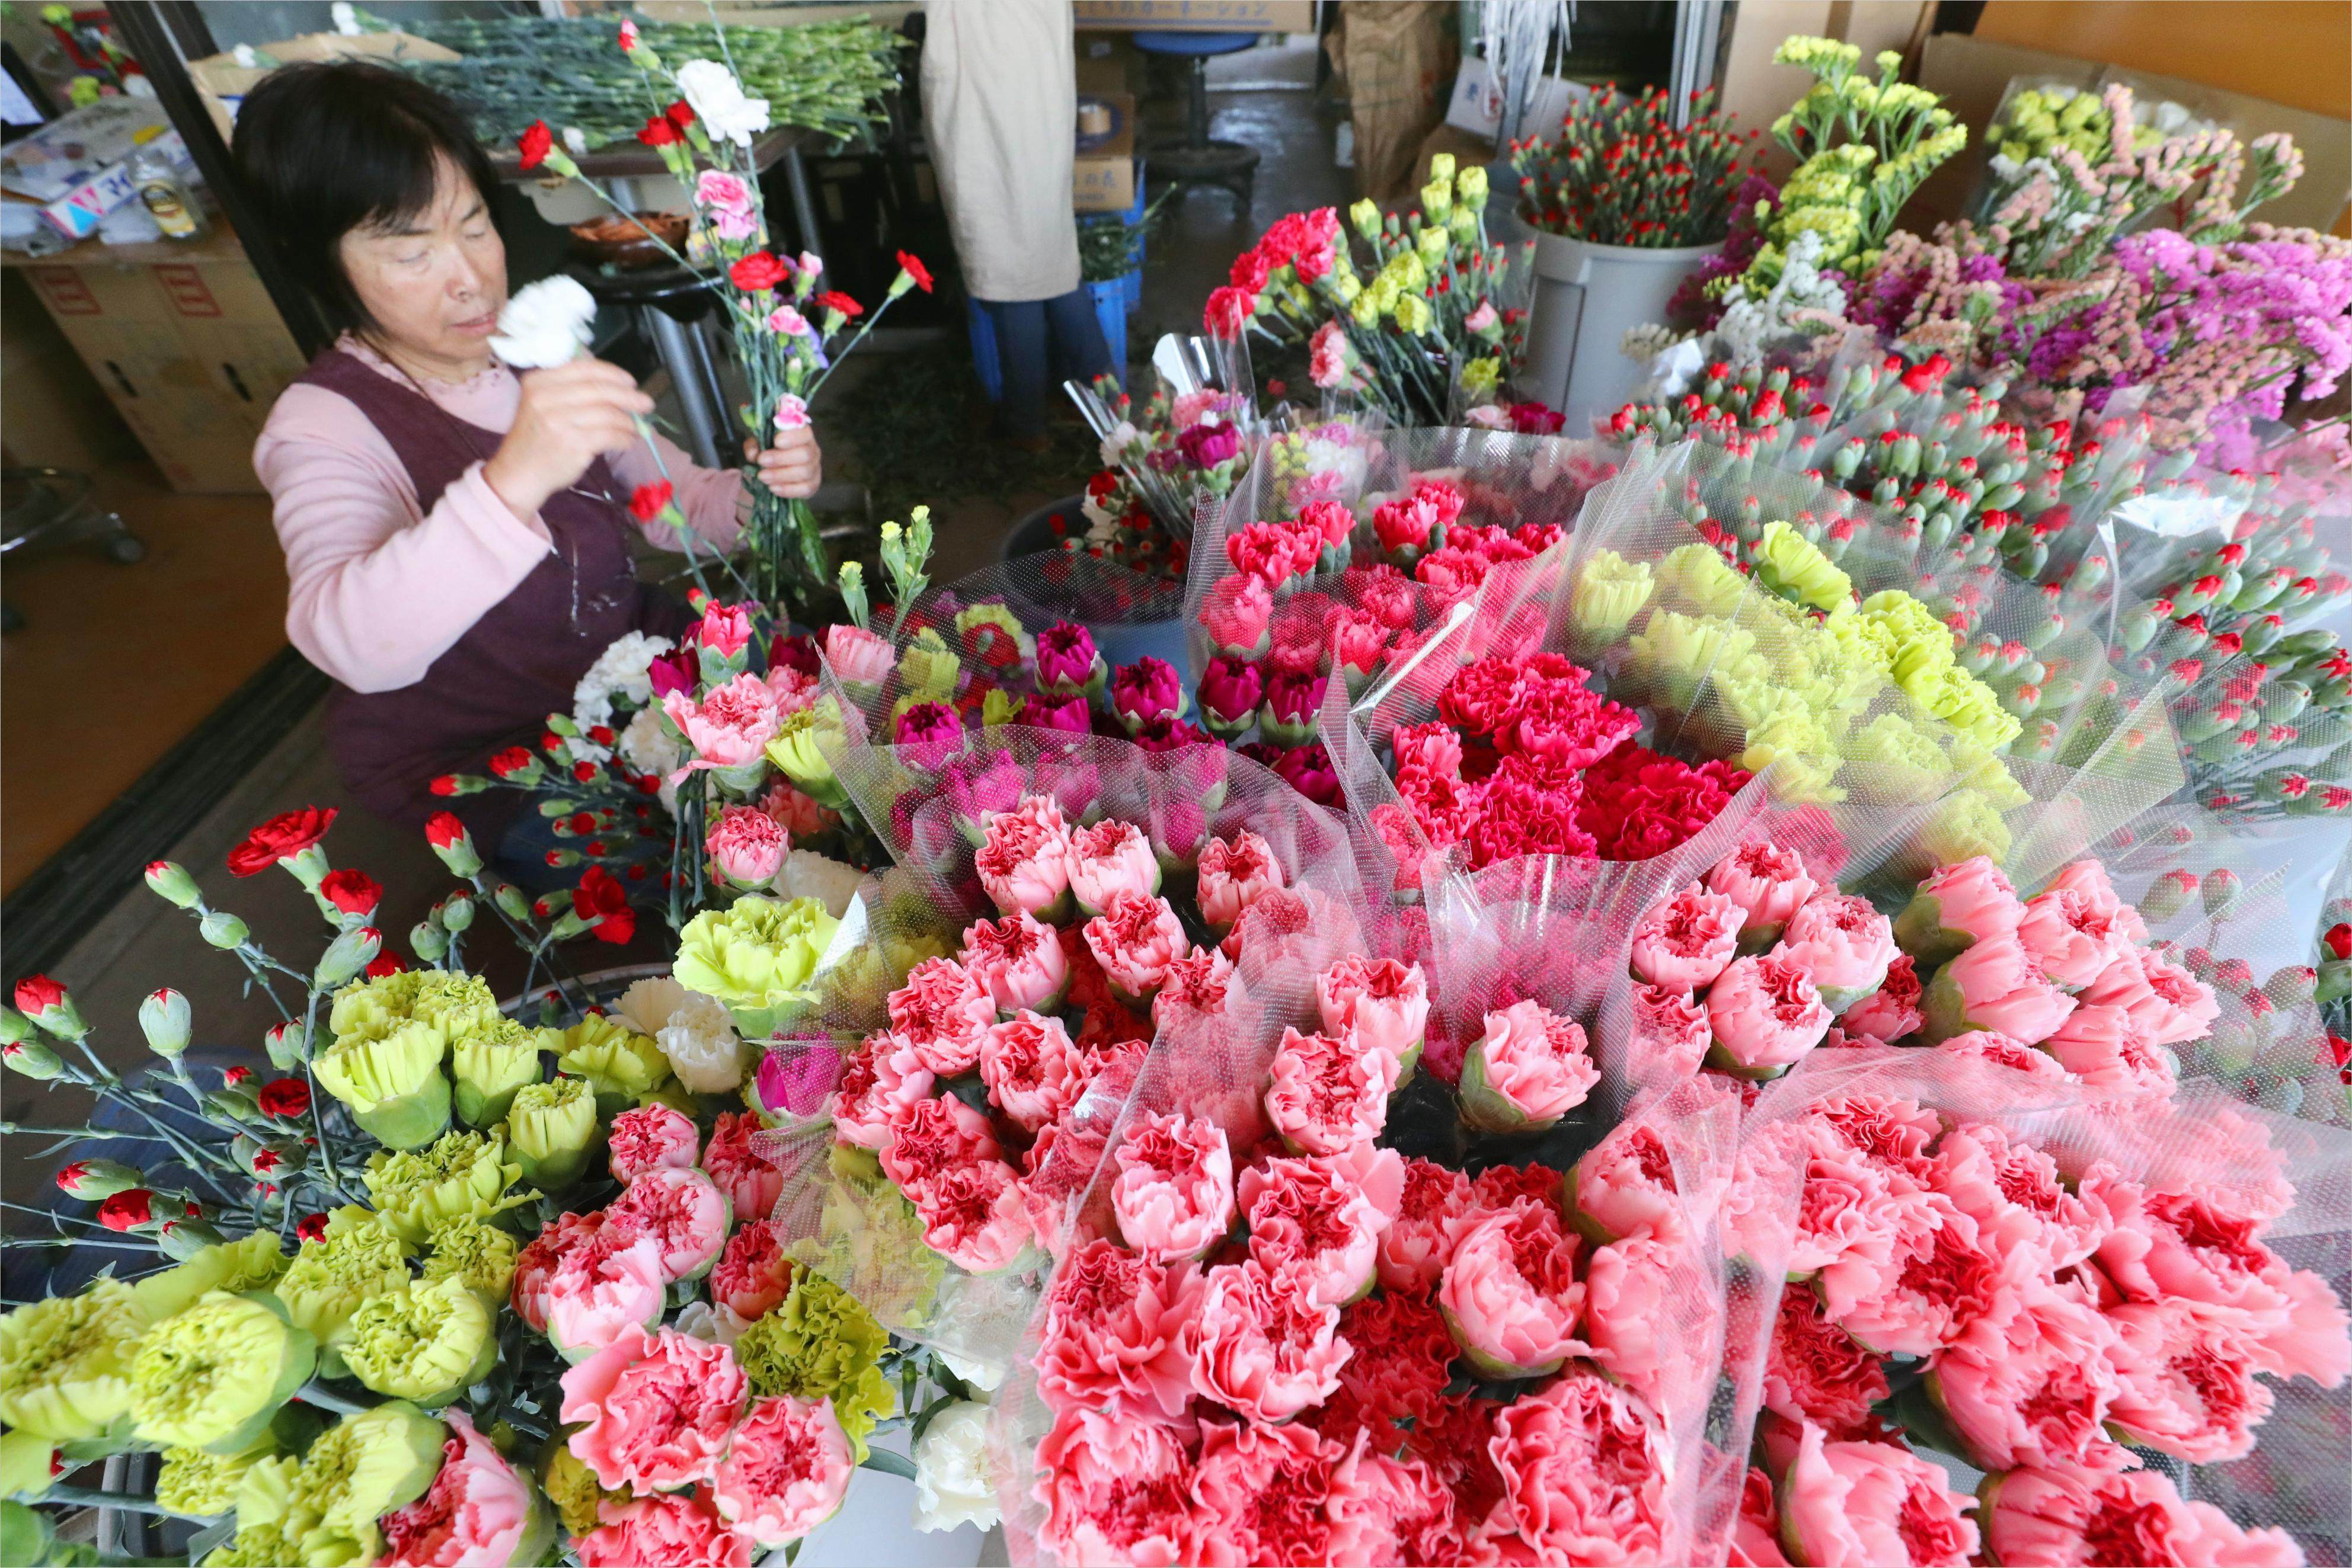 Carnations are prepared for shipment in the northeastern Japanese city of Natori ahead of Mother’s Day in 2017. Photo: Getty Images